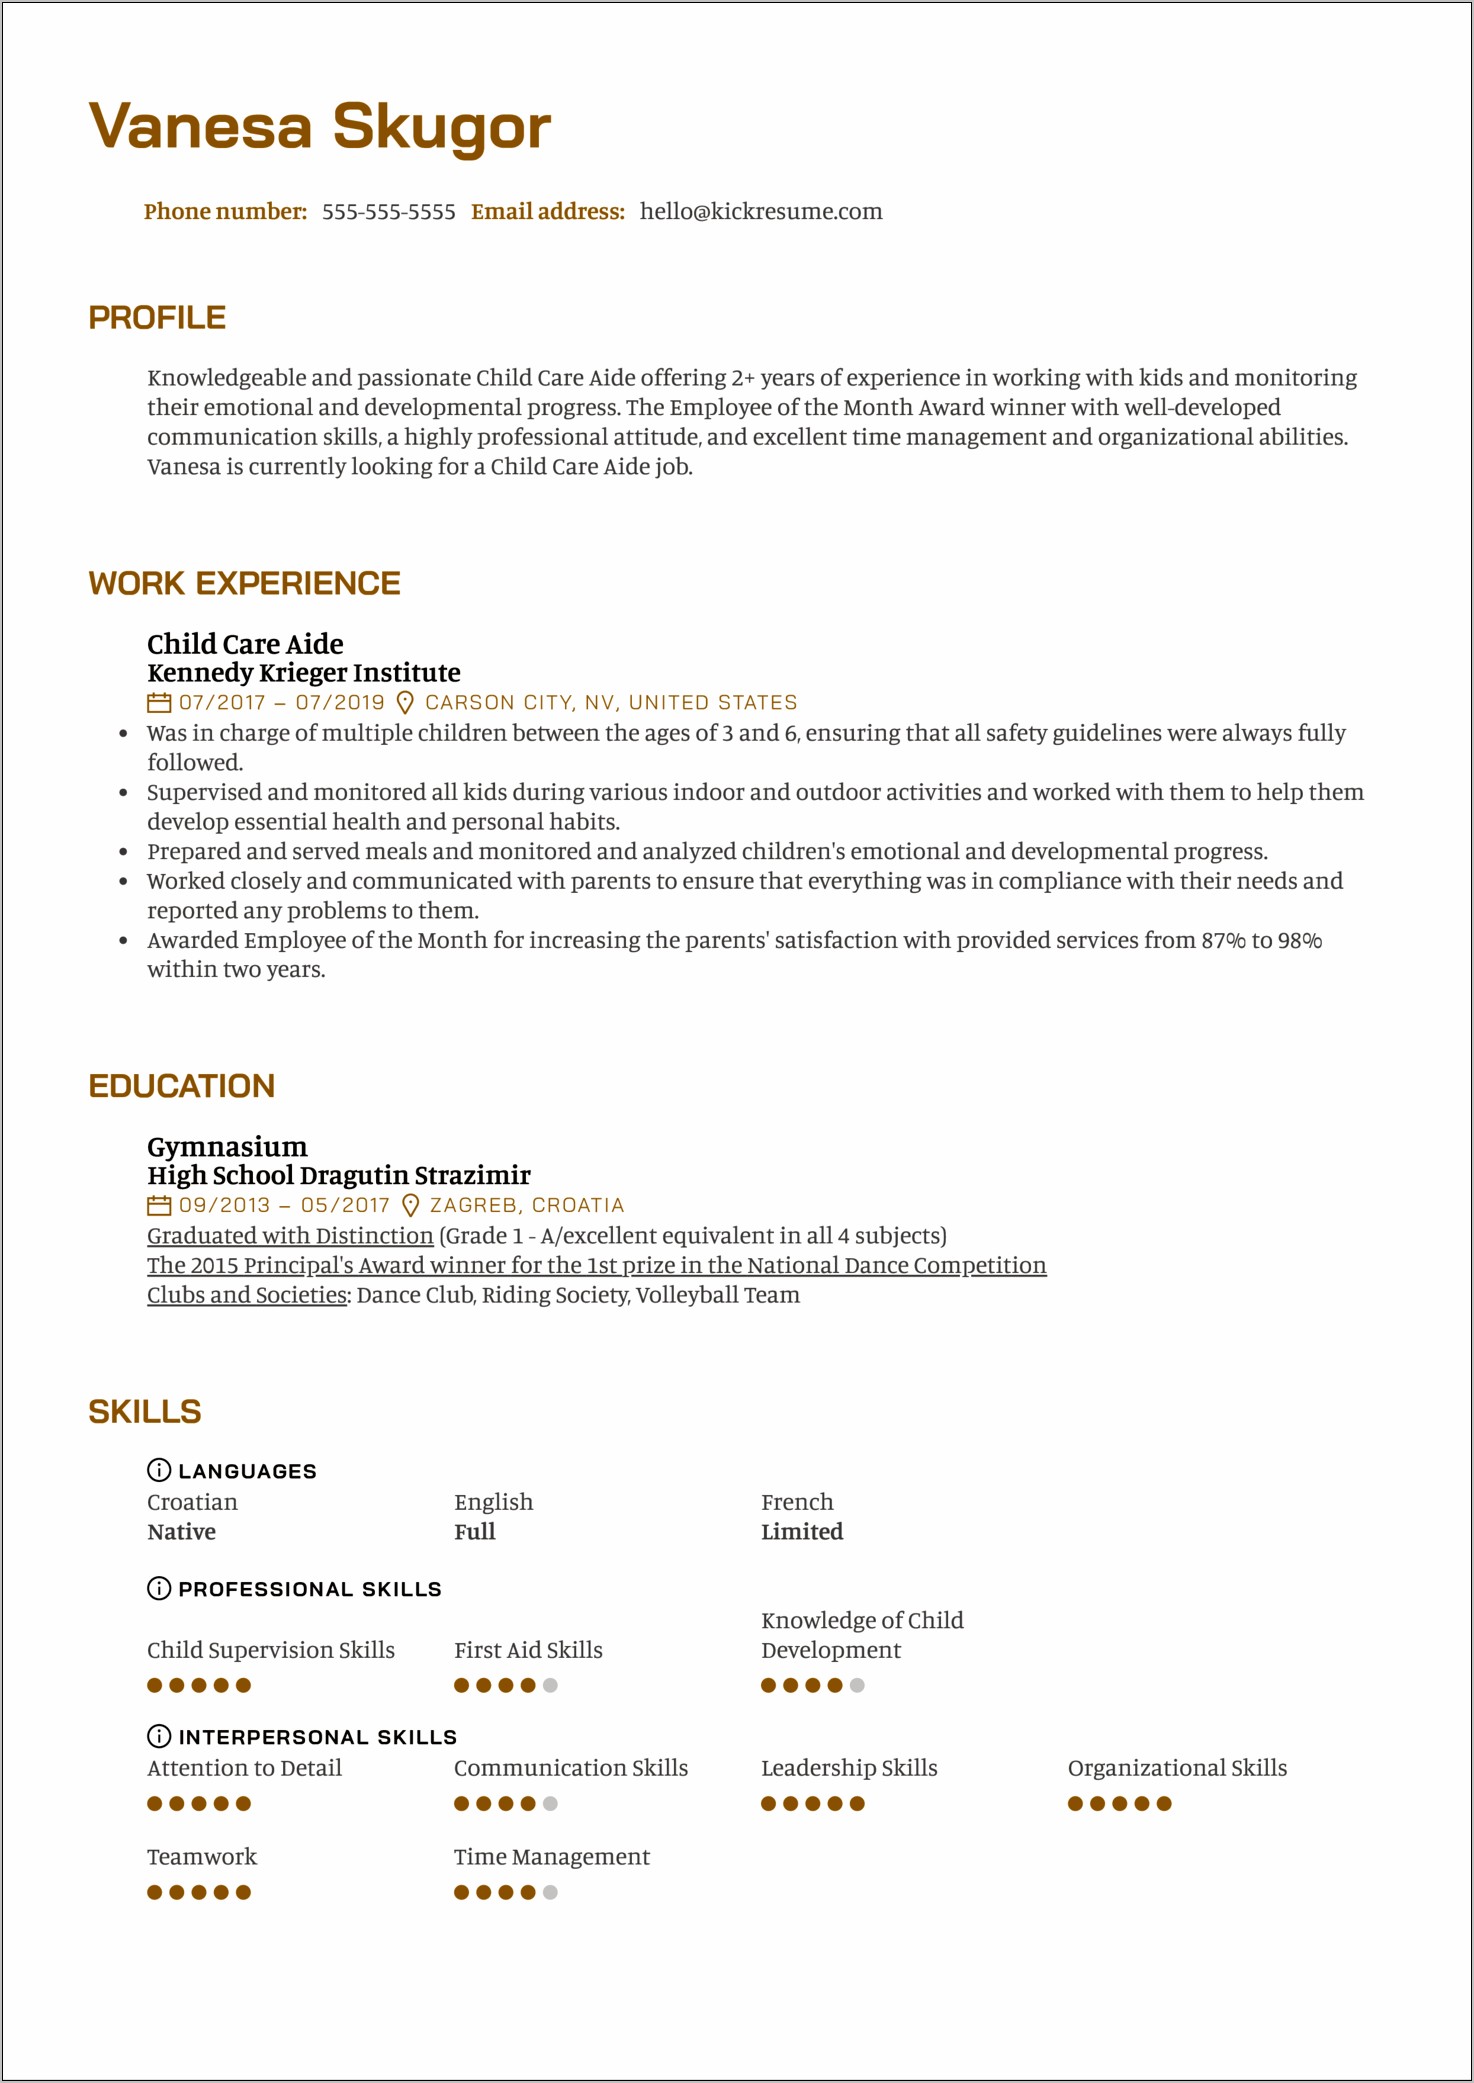 Skills For Resume From Working With Kids